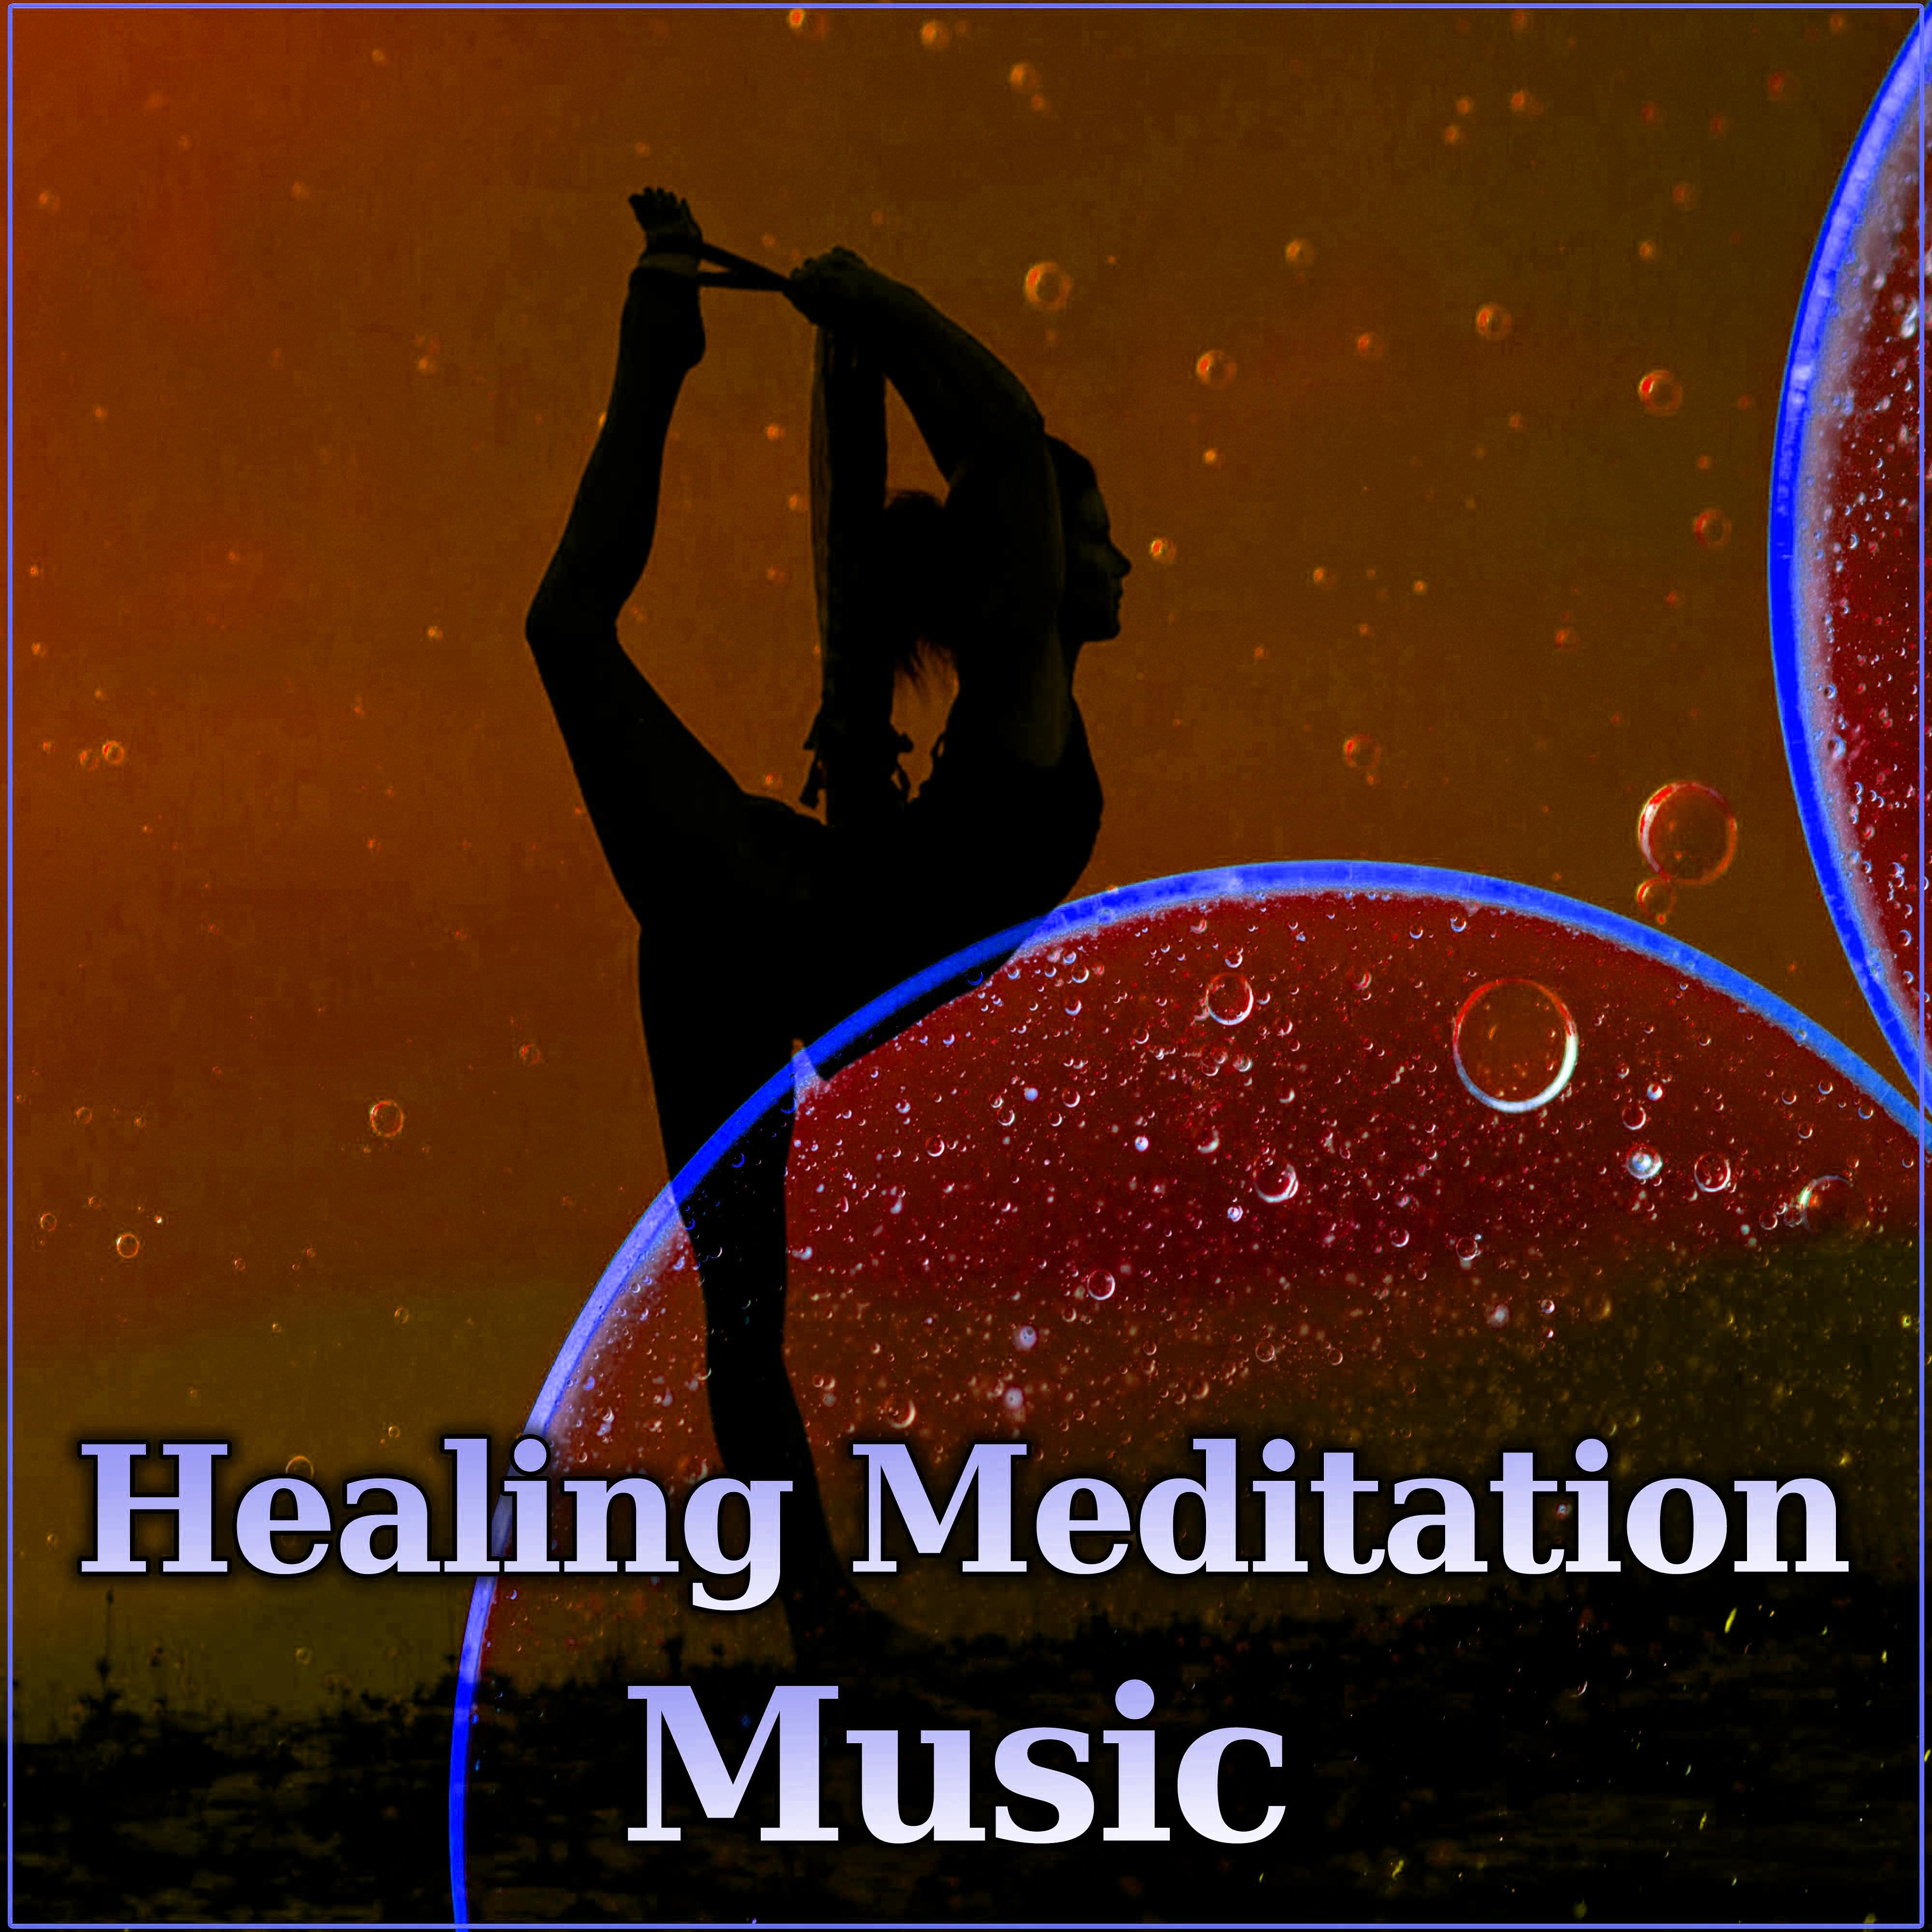 Healing Meditation Music  New Age Music for Yoga Exercises, Stress Relief, Mindfullness Healing Sounds, Meditation, Relax Nature Sounds